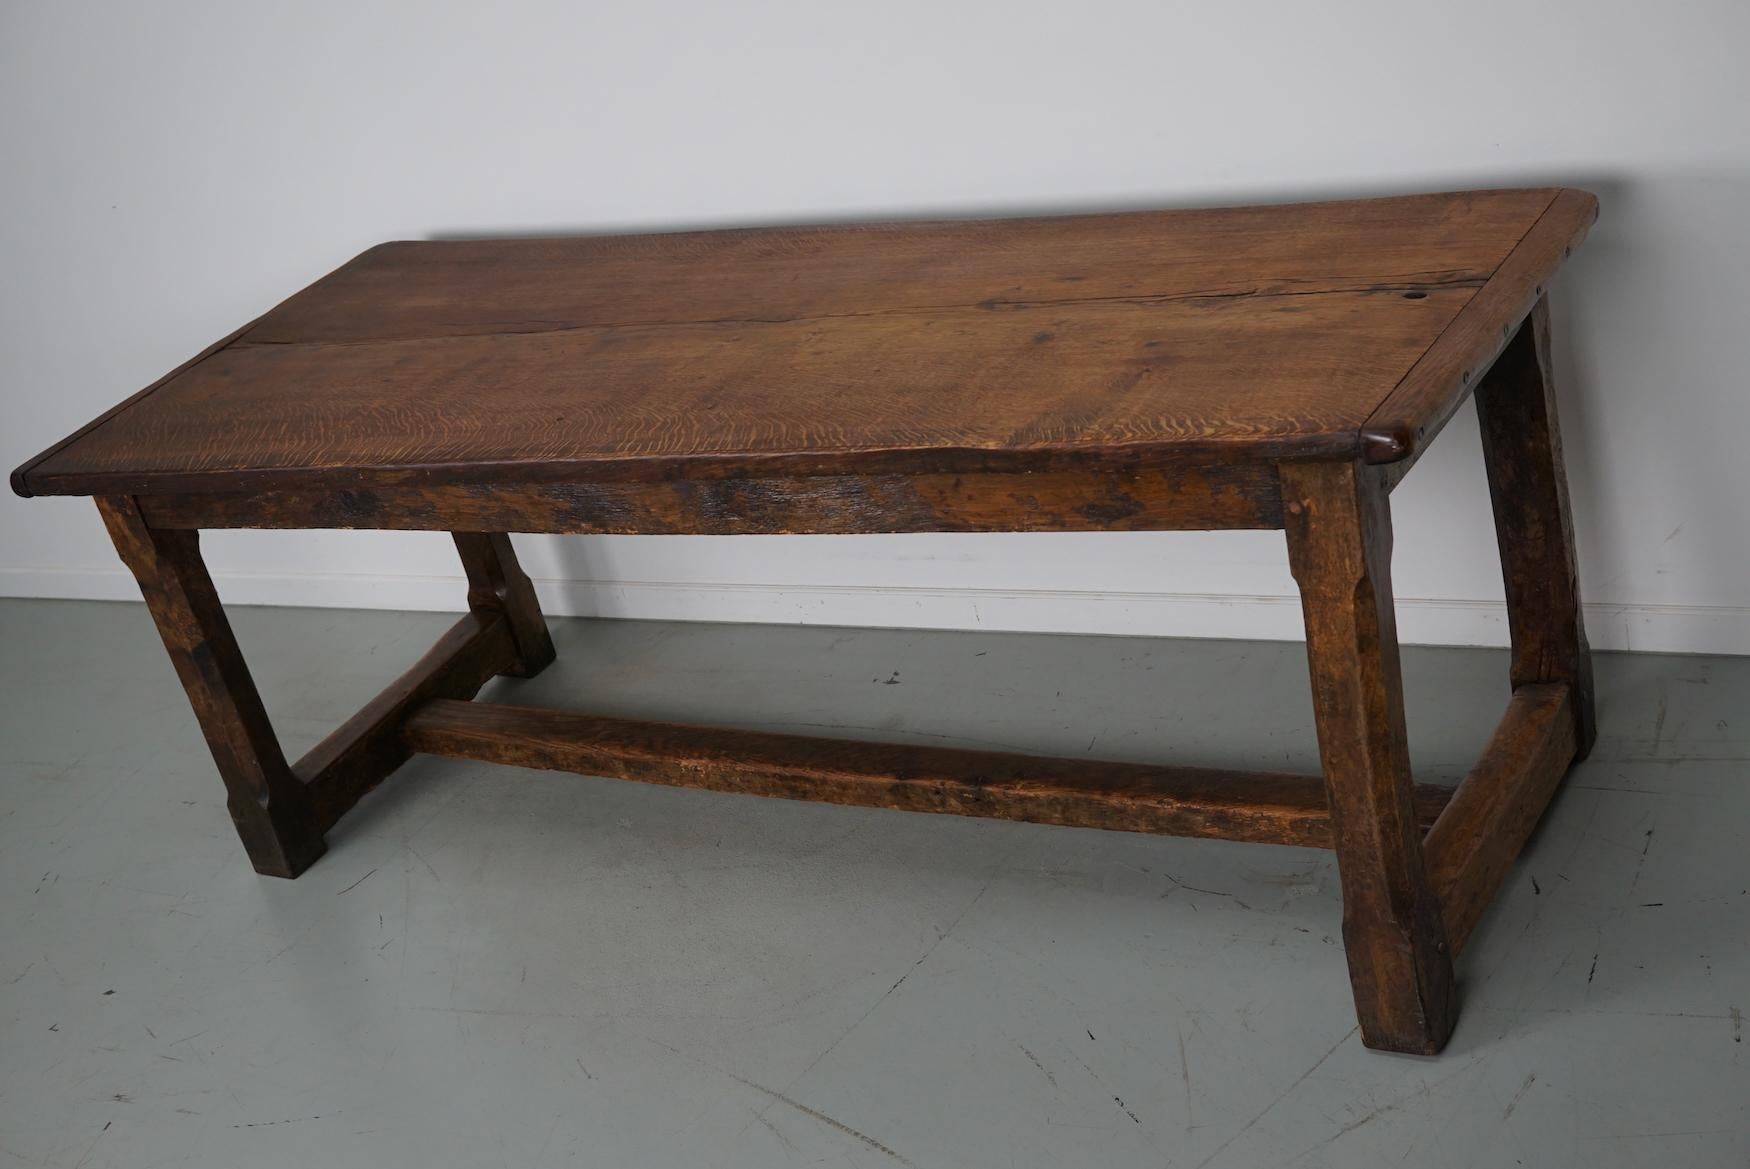 This elegant table was made in Southern France in the 18th century. It has a tabletop made from one large slab of tiger oak. It has a very warm color and the table shows many marks of use, warping, old repairs and a has a great patina. The knee